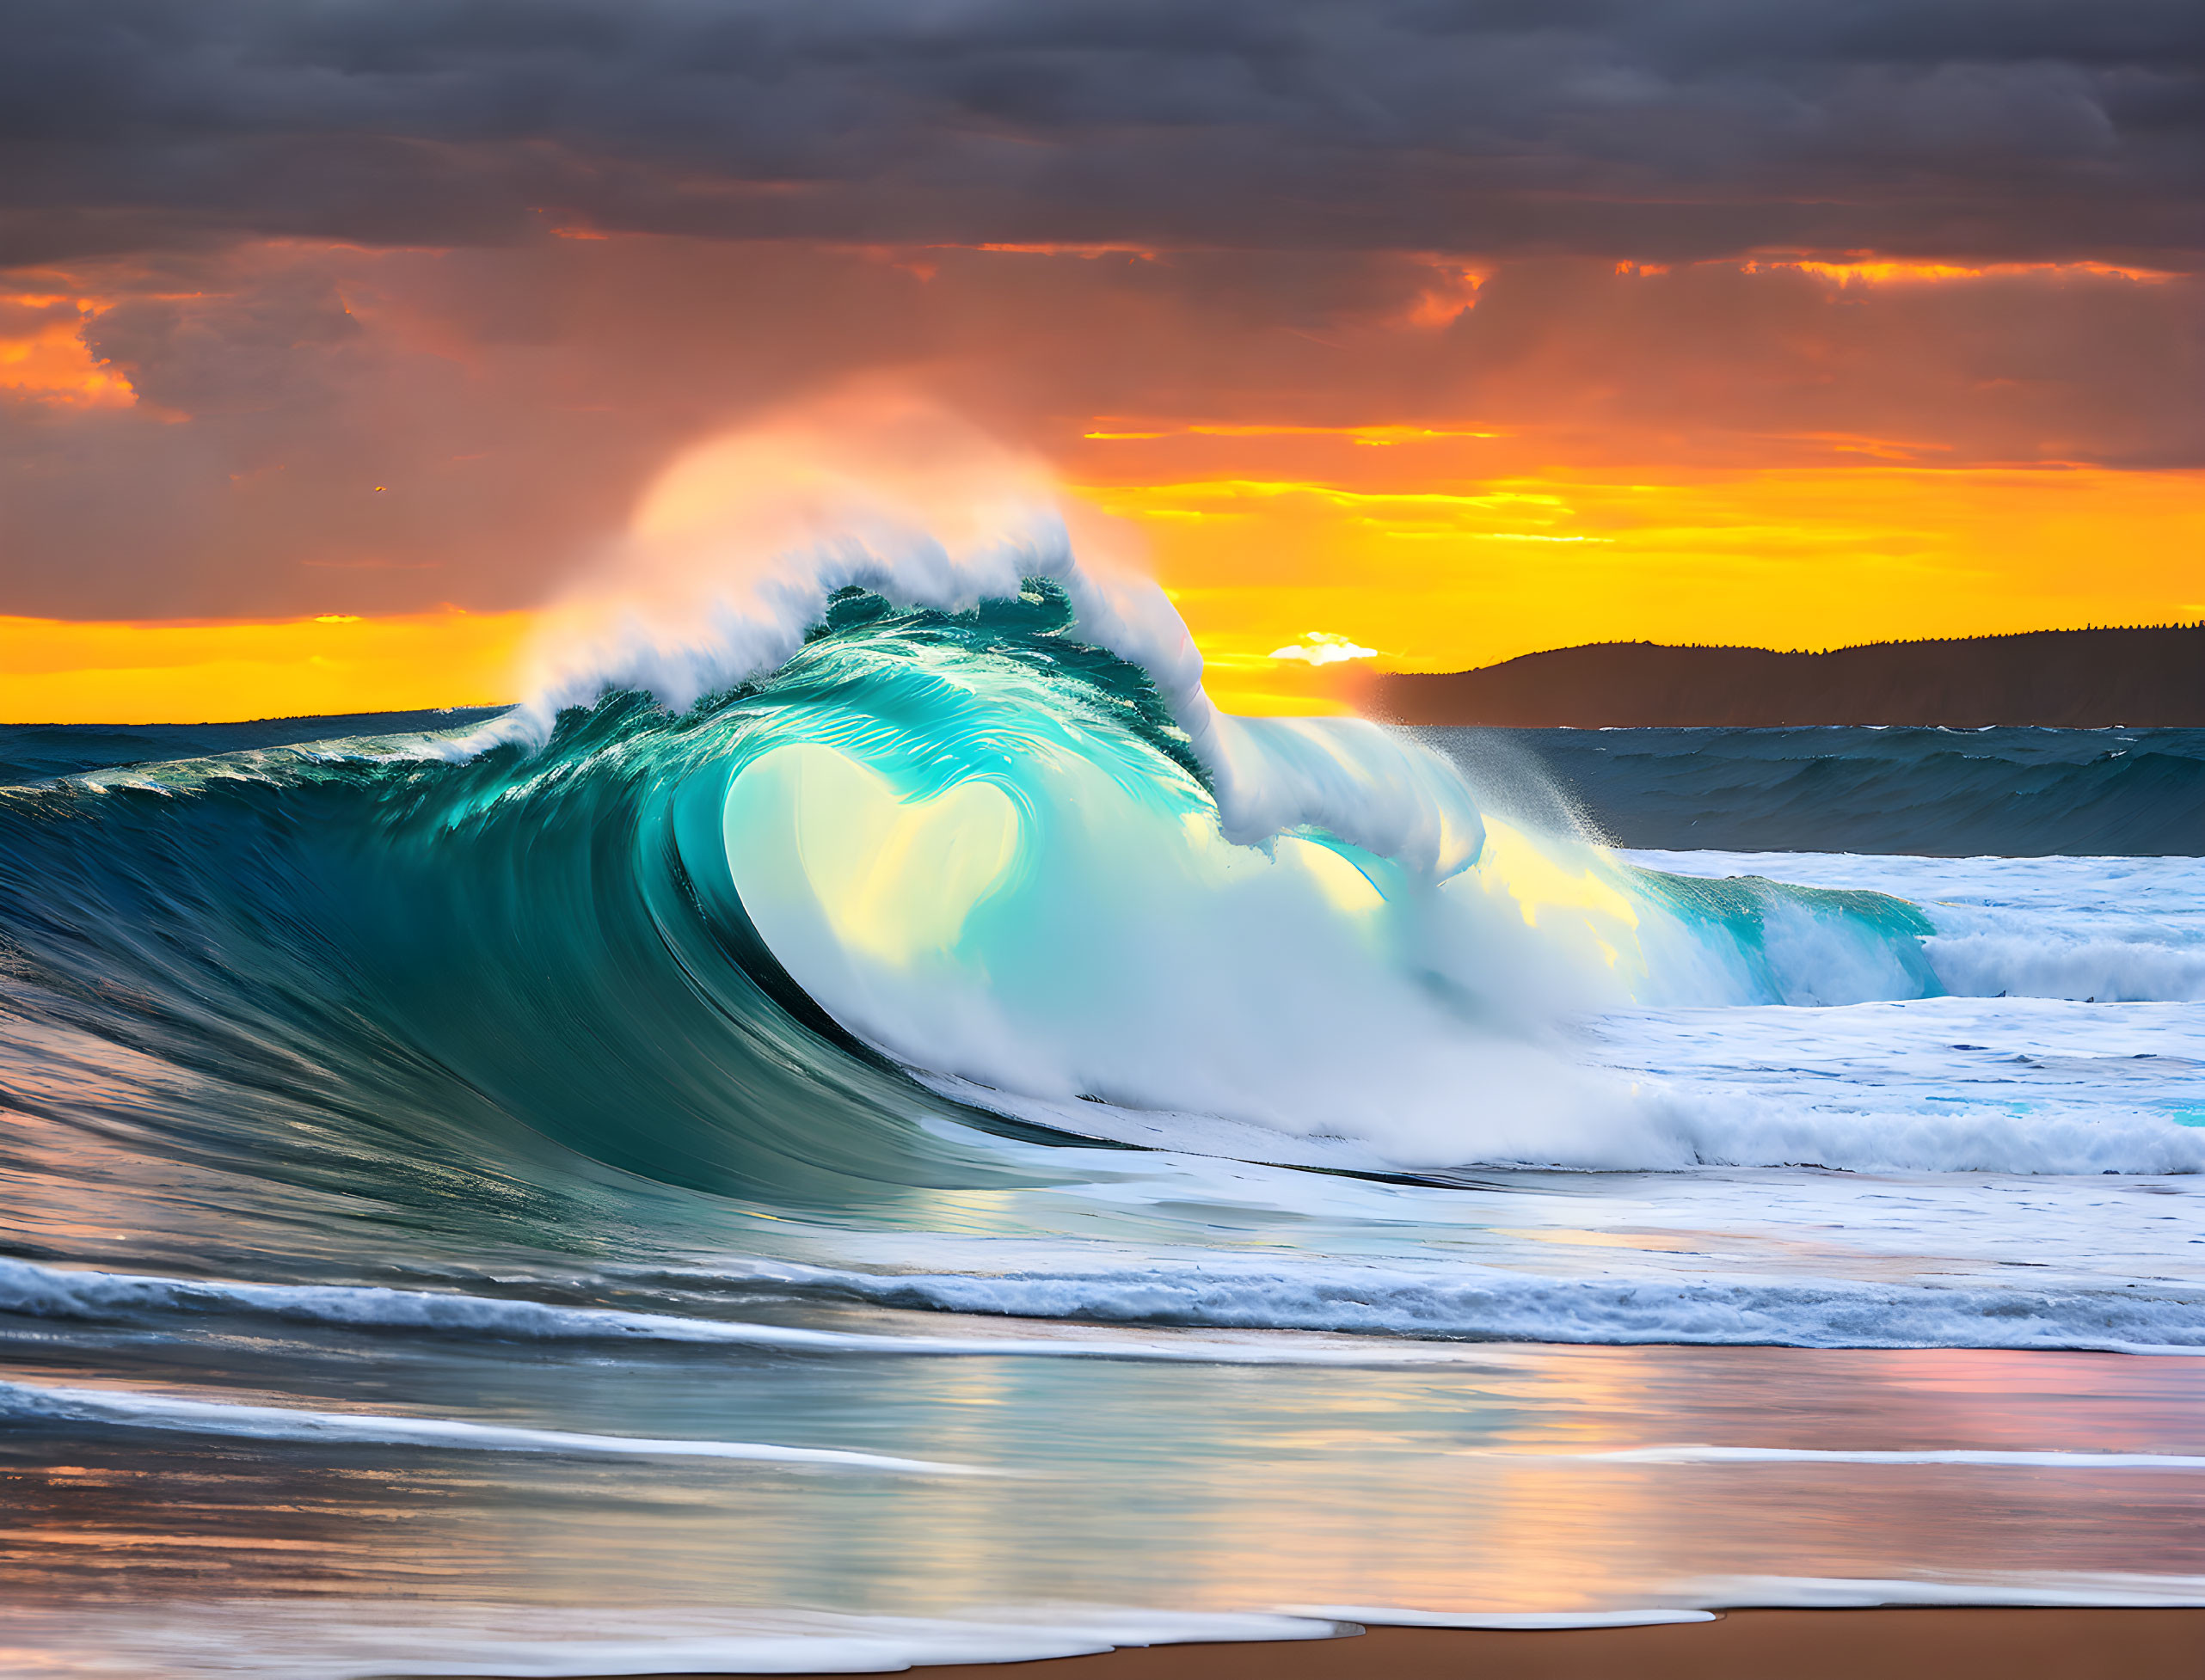 Colorful Ocean Wave Against Fiery Sunset Sky